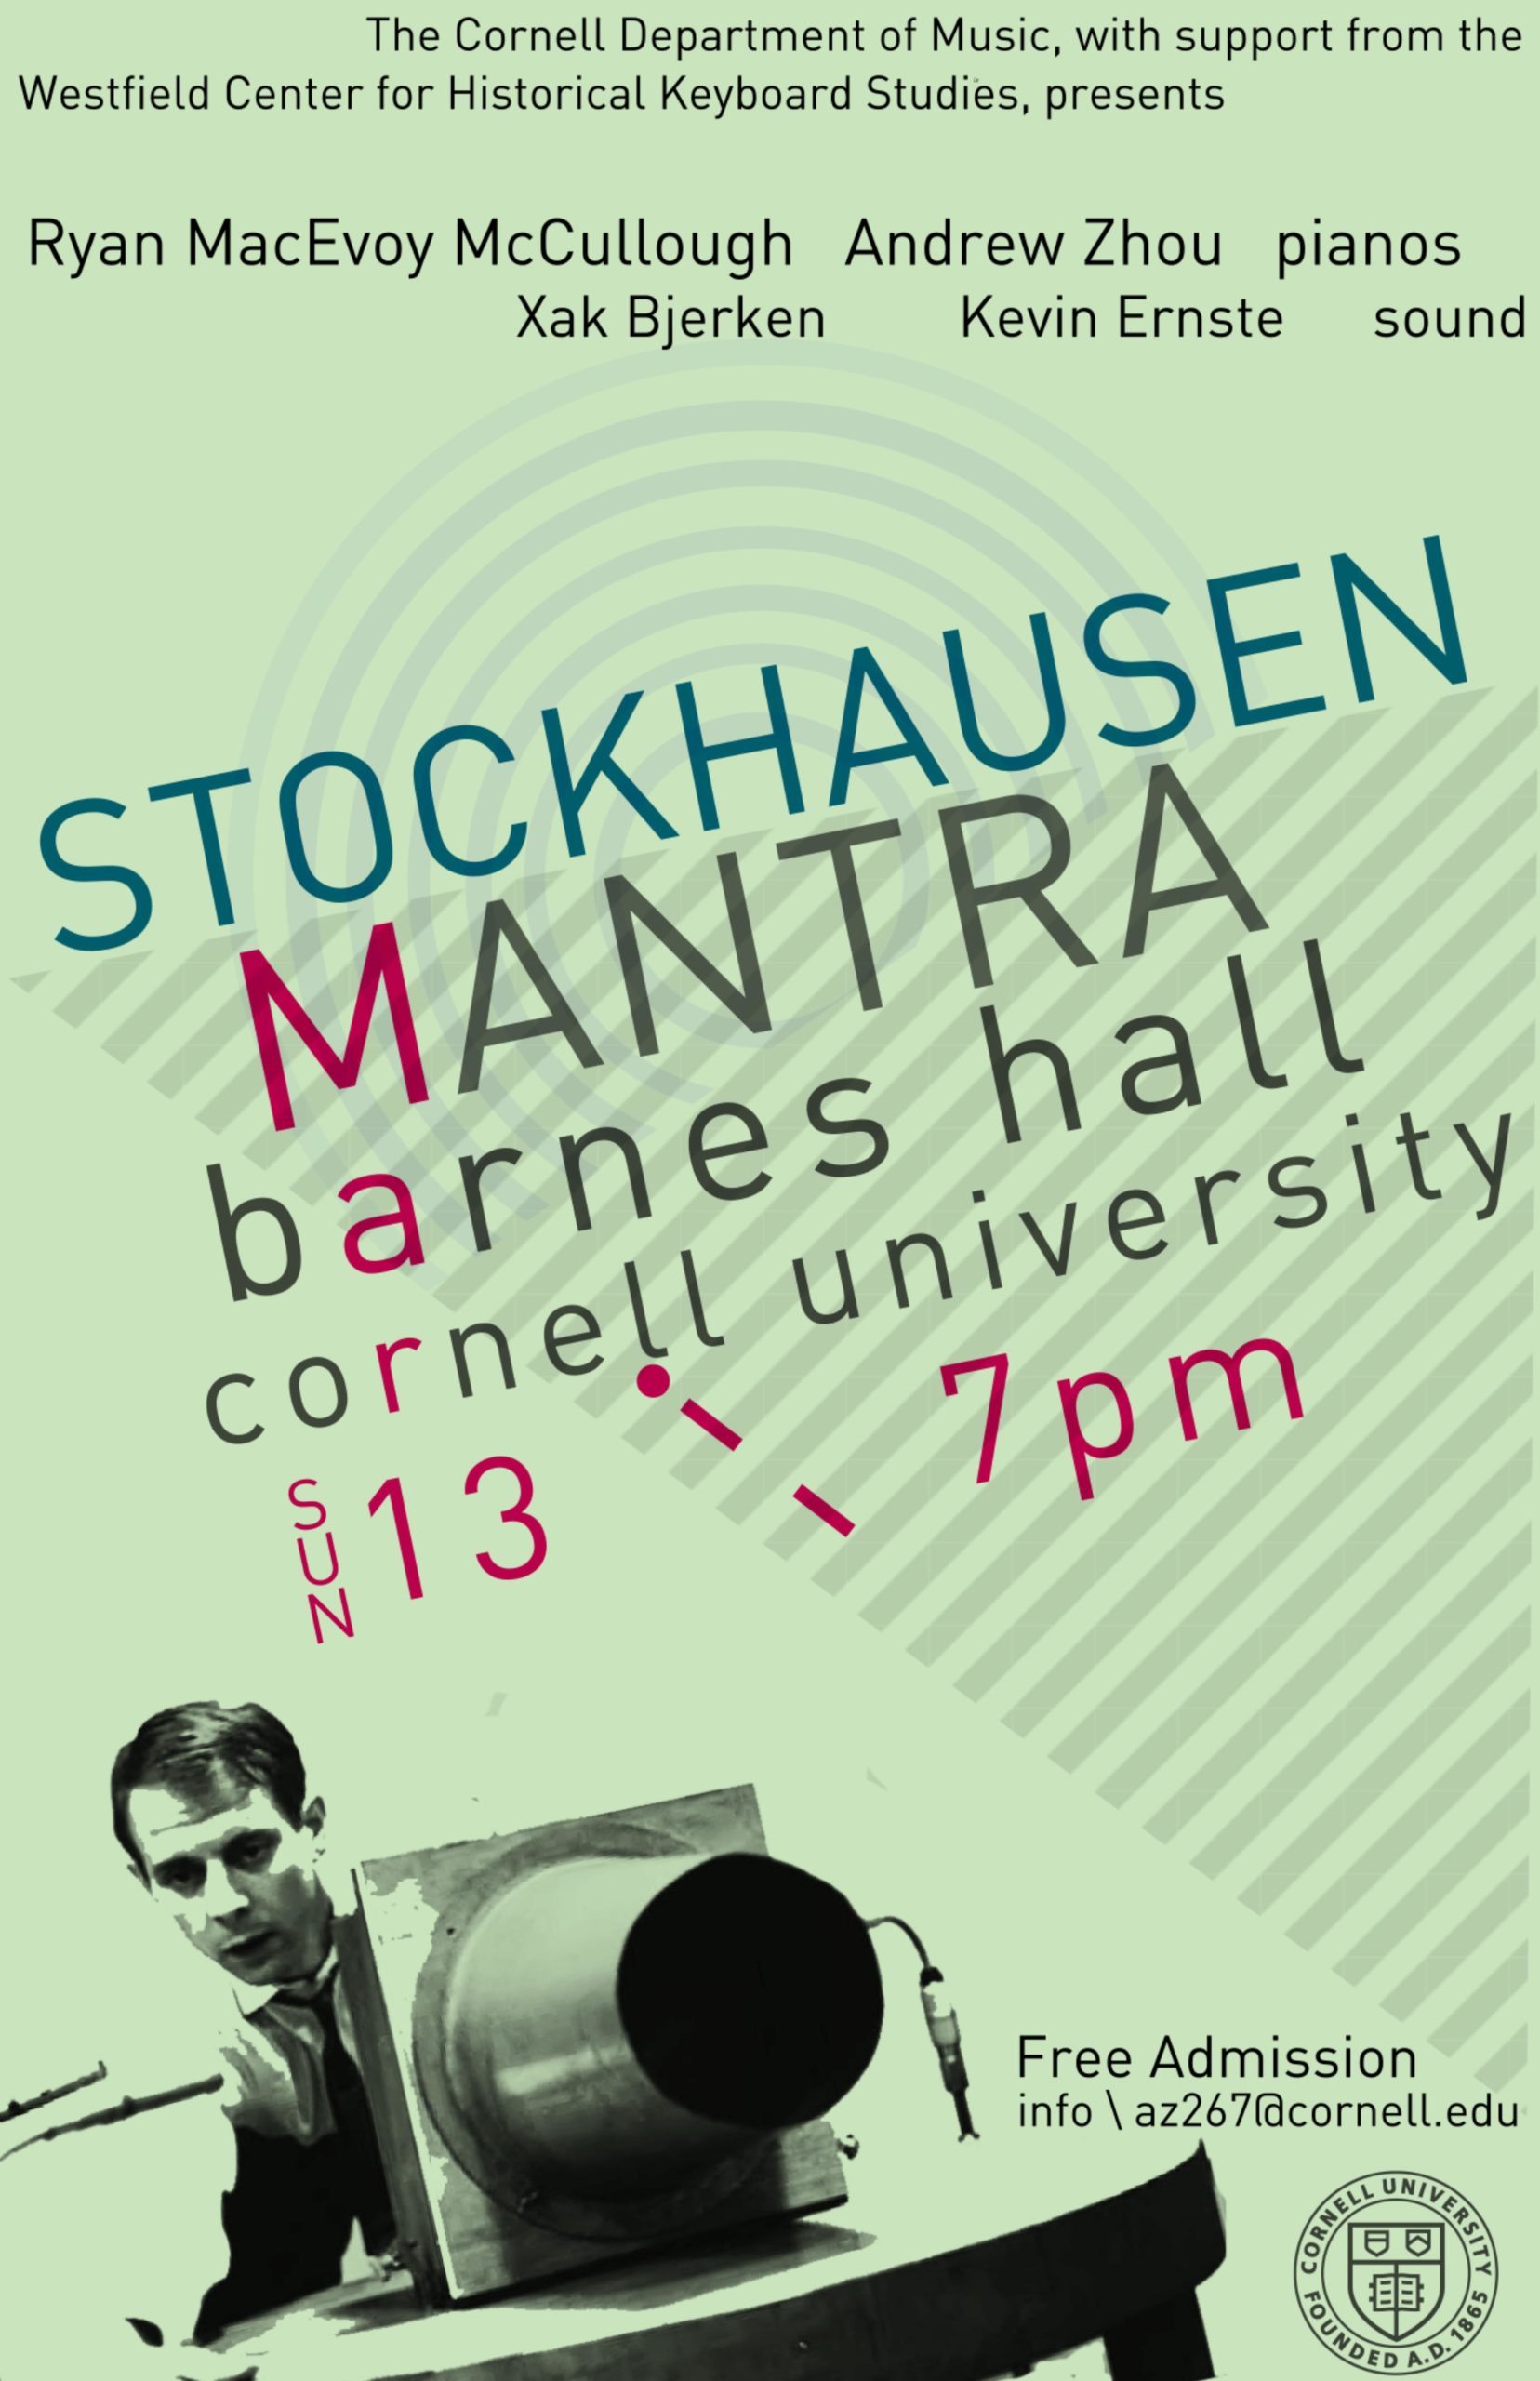 Poster for a performance of Stockhausen's Mantra, March 13, 2016